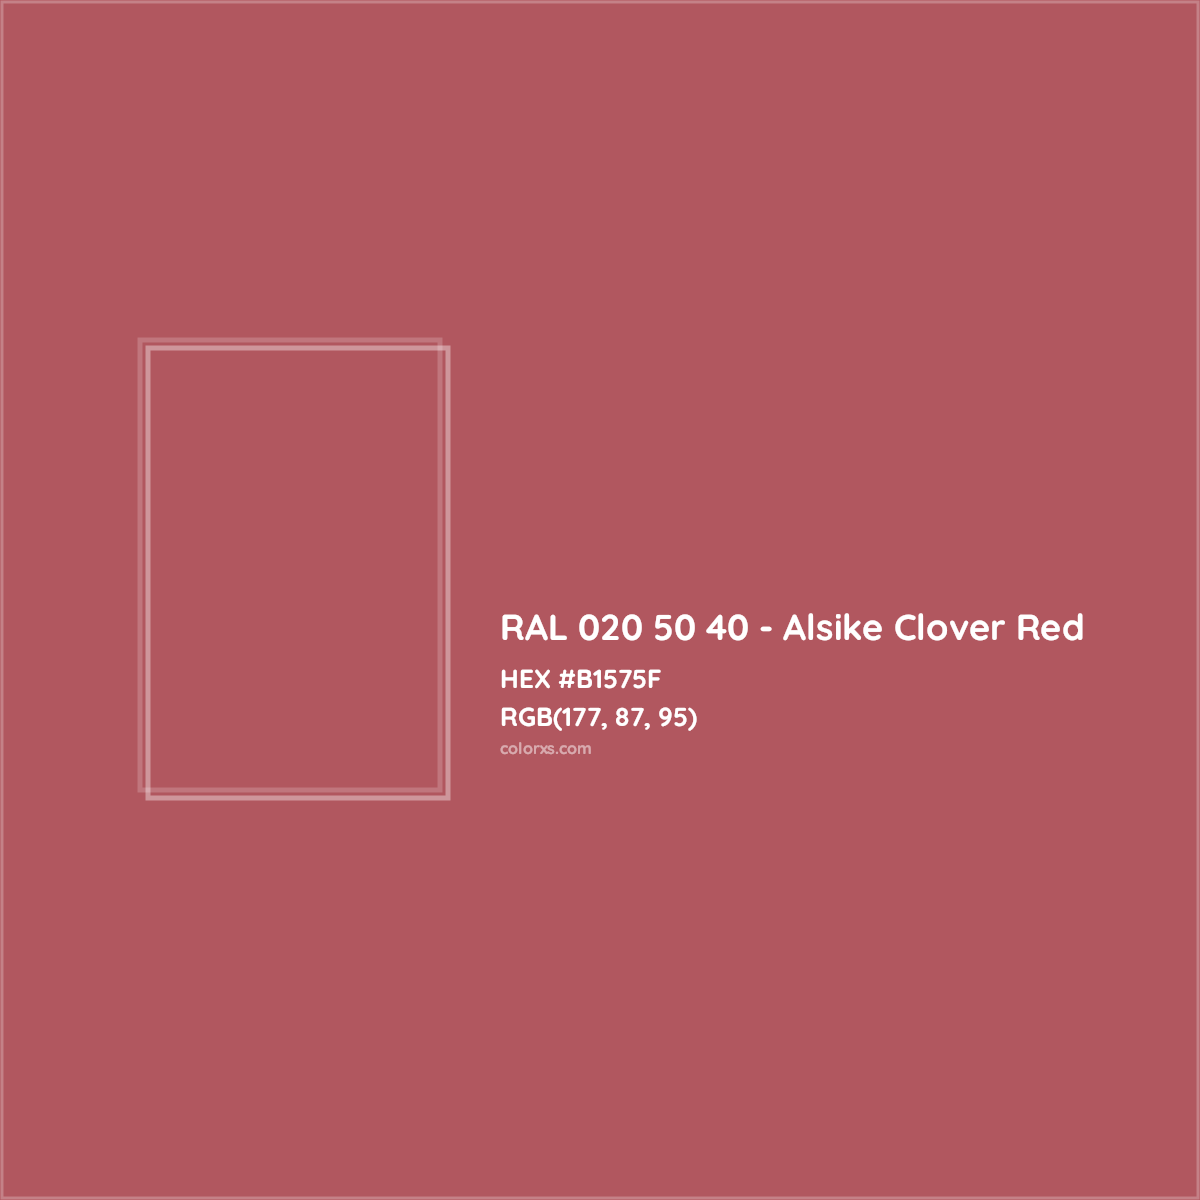 HEX #B1575F RAL 020 50 40 - Alsike Clover Red CMS RAL Design - Color Code